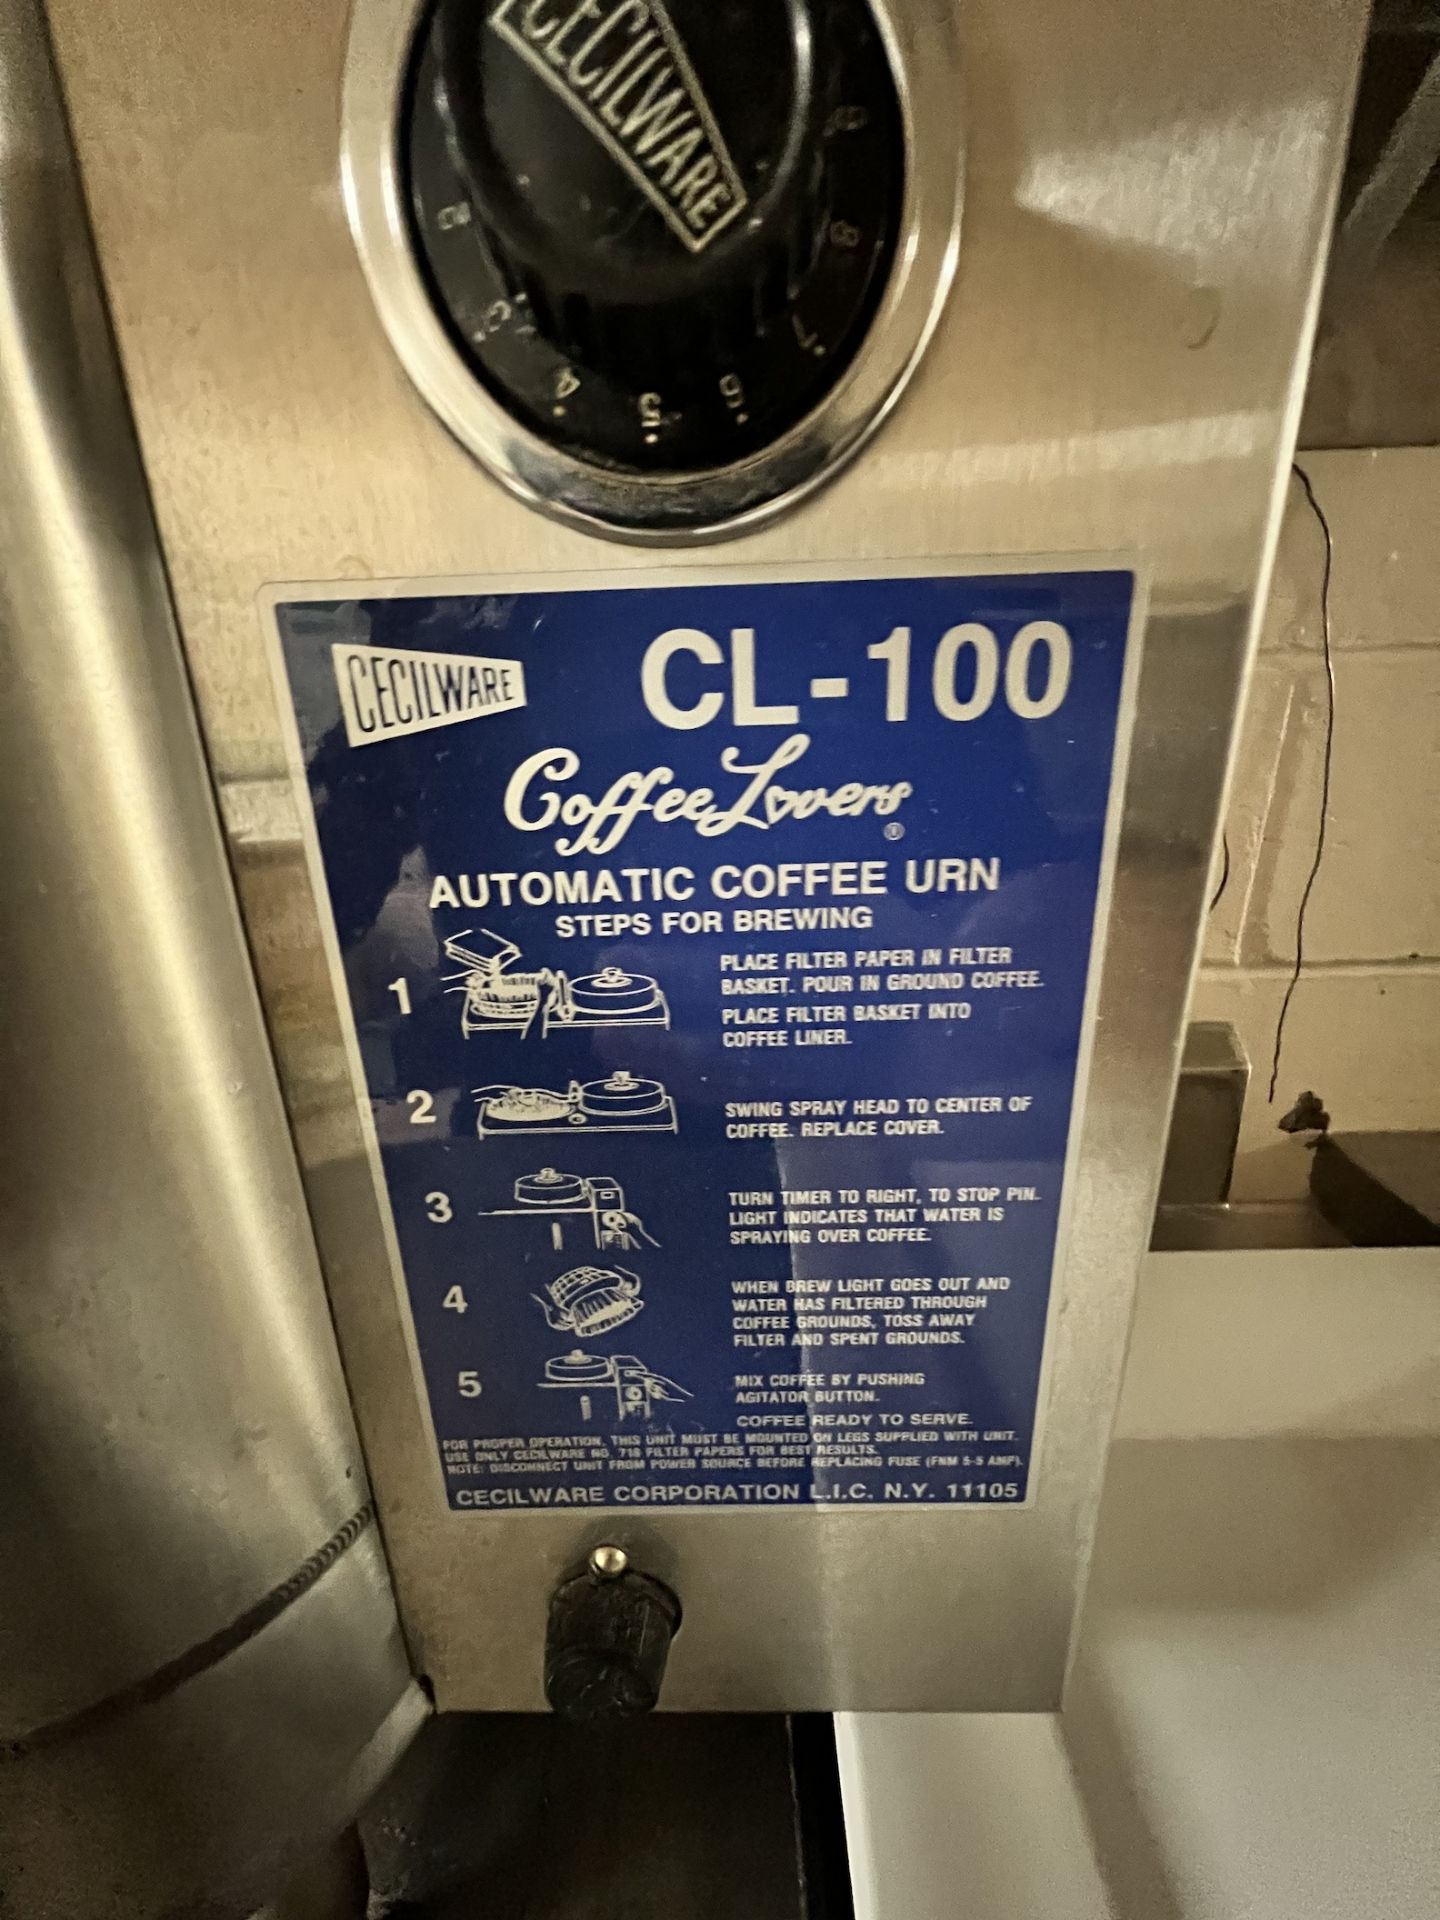 CECILWARE COFFEELOVERS CL-100 AUTOMATIC COFFEE URN (SIMPLE LOADING FEE $55) - Image 3 of 4